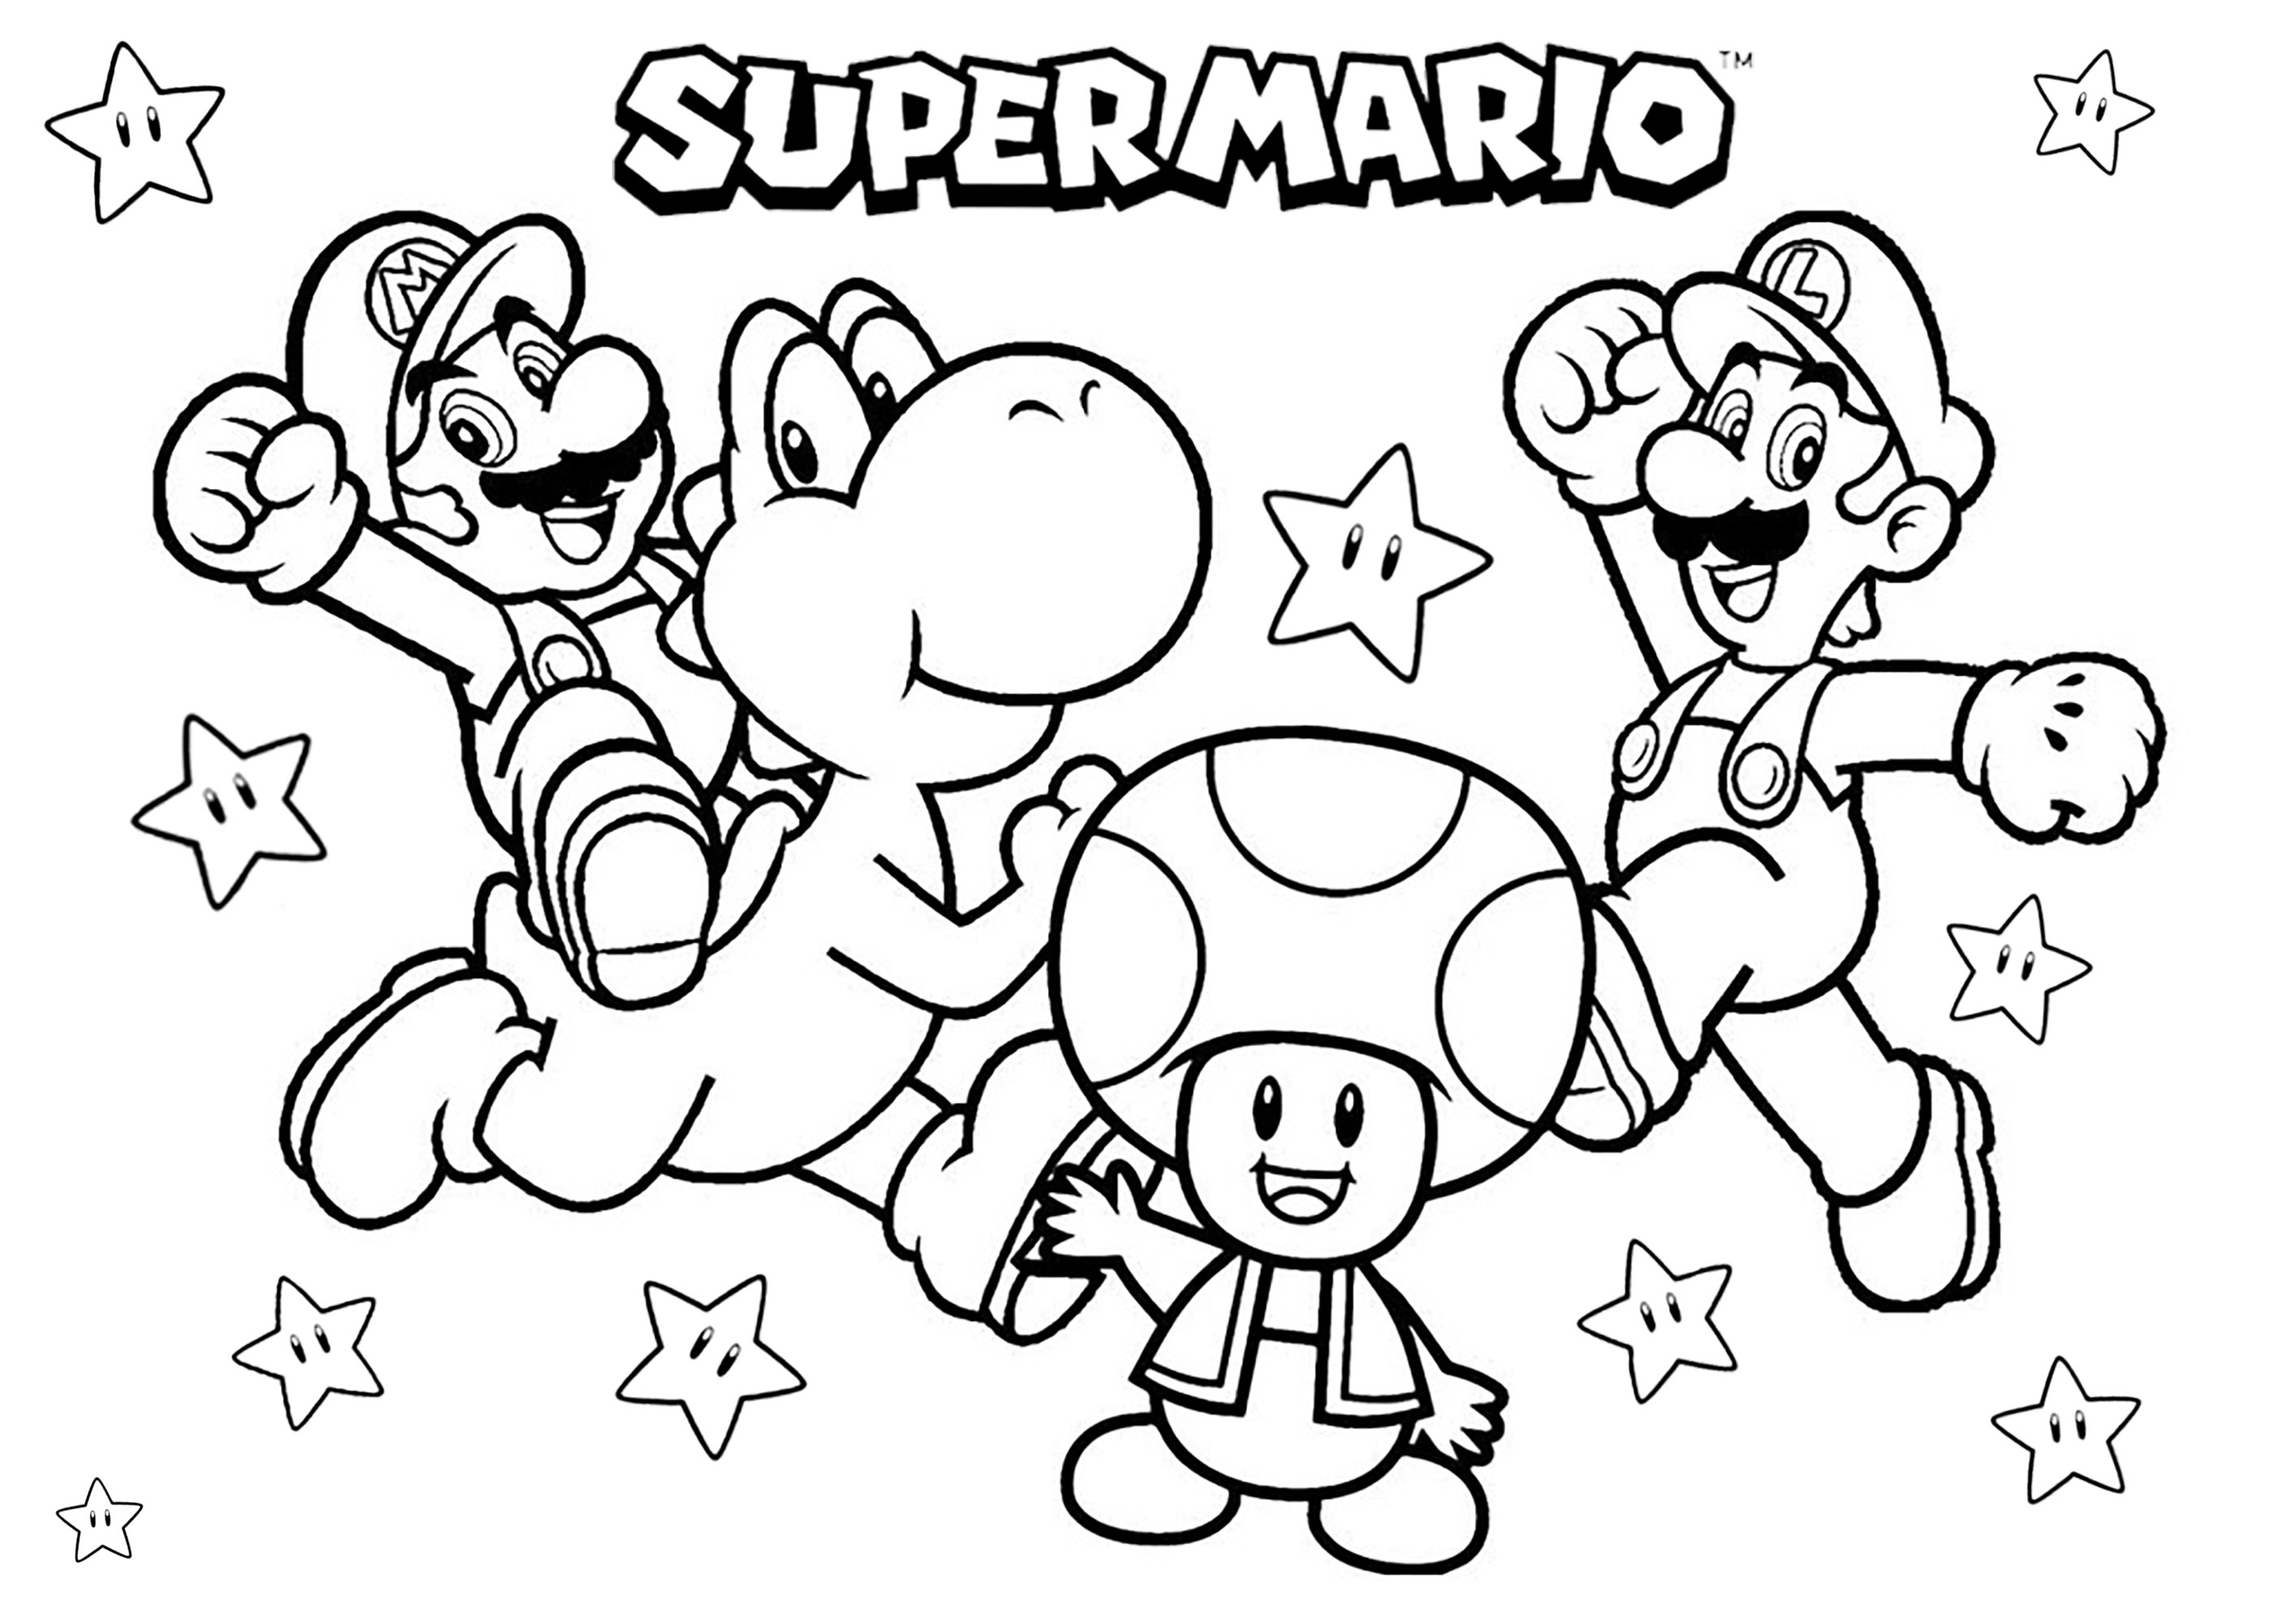 Mario, Luigi, Yoshi and Toad with many stars. A coloring page with some of the main characters of Super Mario Bros: The brothers Mario and Luigi, the dinosaur Yoshi and the mushroom Toad!